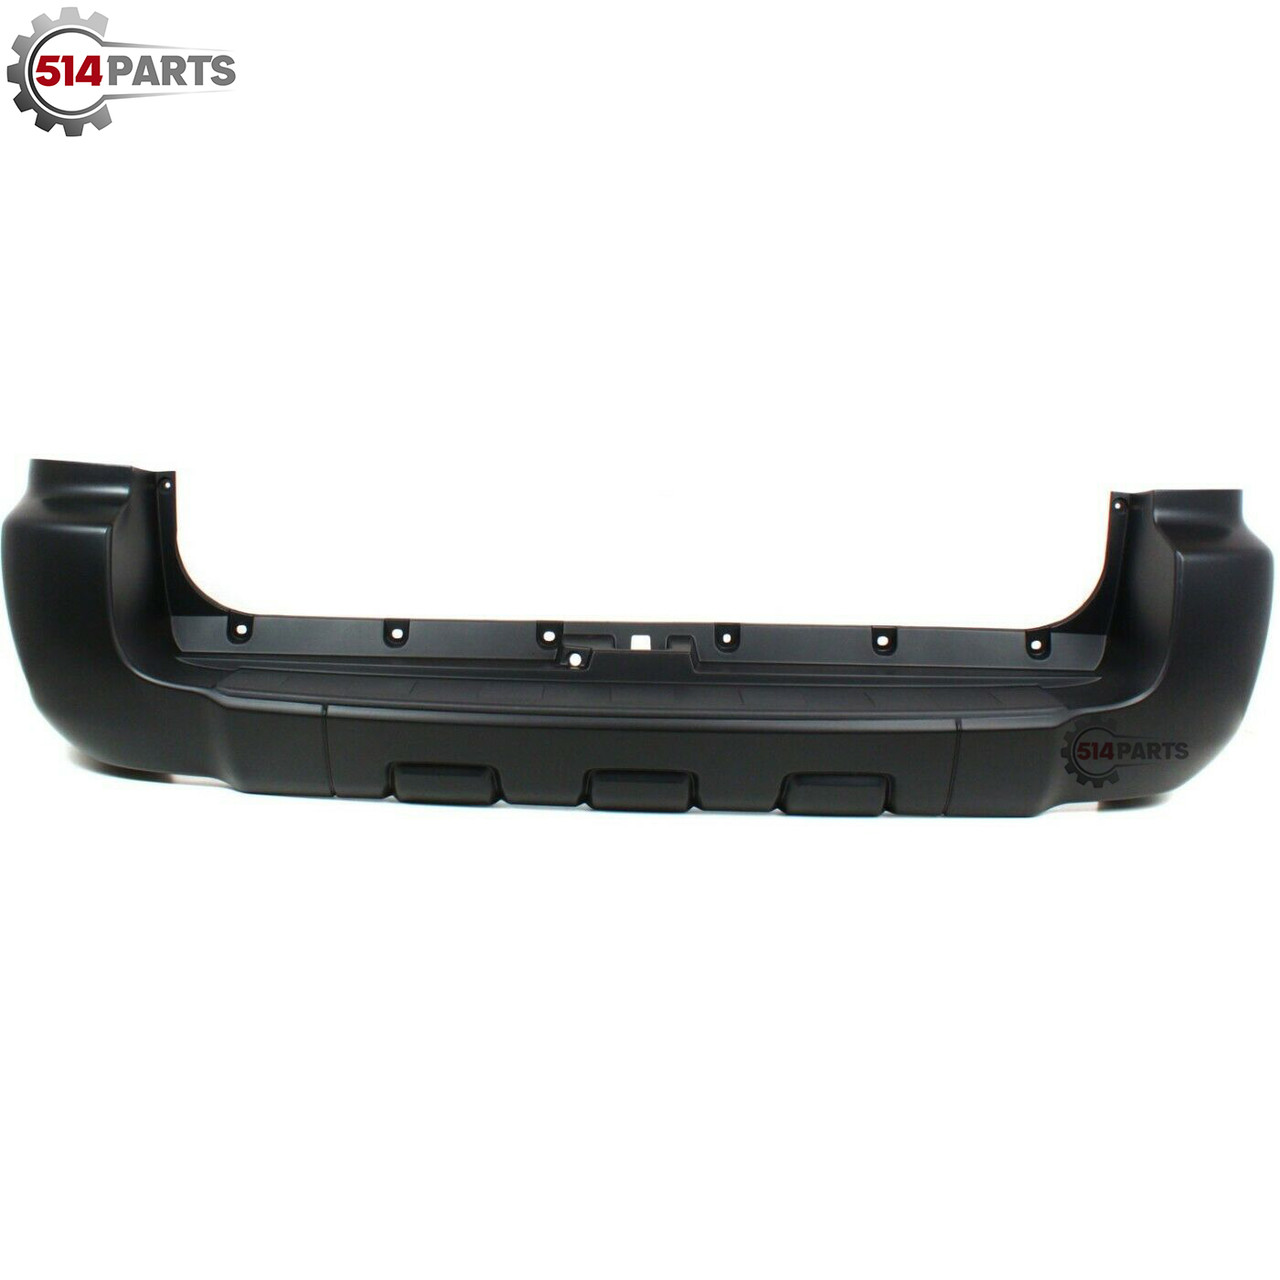 2006 - 2009 TOYOTA 4Runner PRIMED REAR BUMPER COVER without TRAILER HITCH - PARE-CHOC ARRIER PRIME